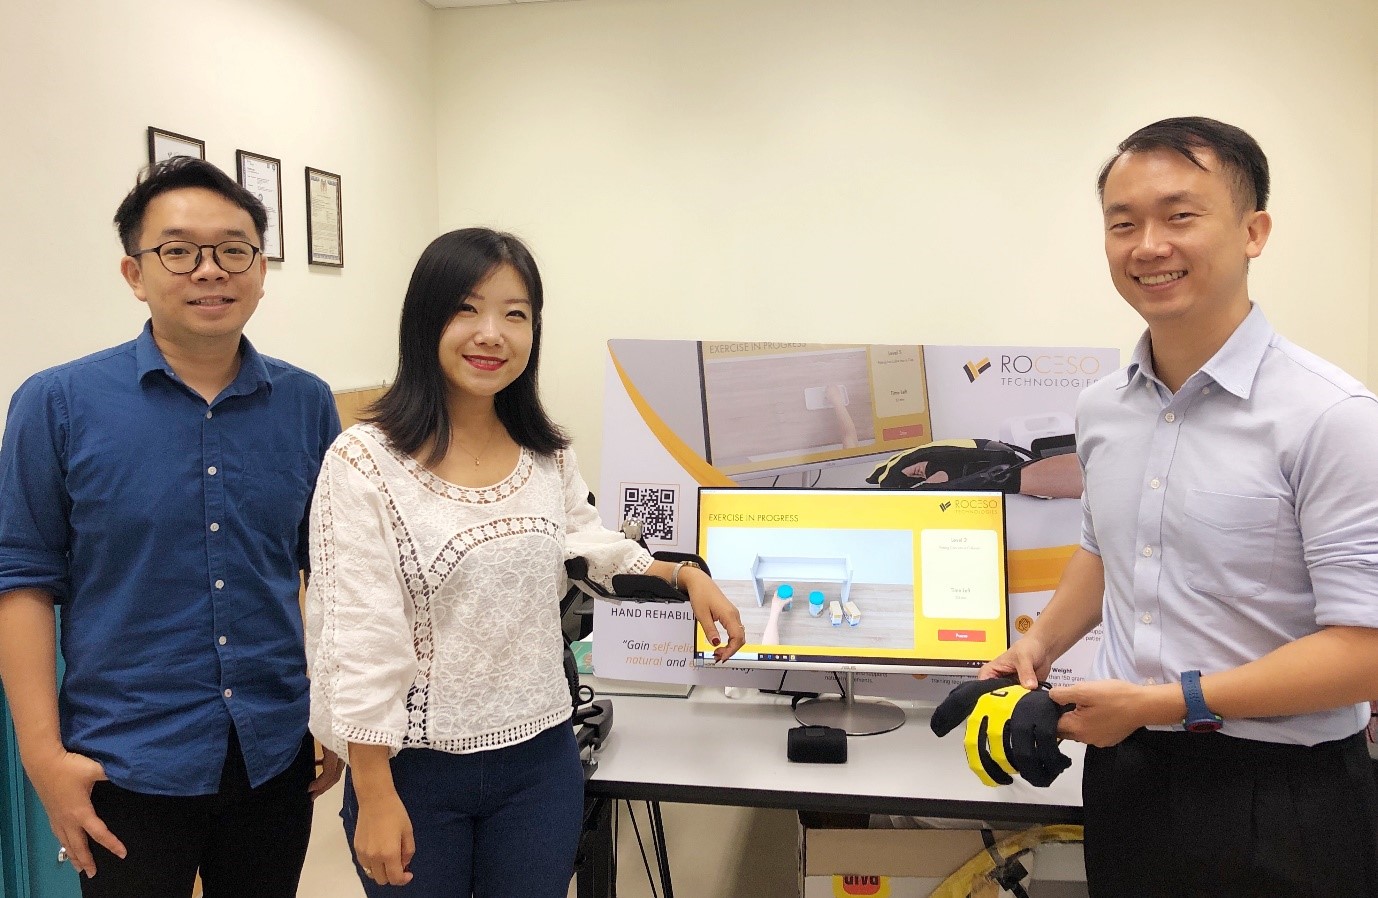 From left to right: Dr Hong Kai Yap, Jane Wang and Prof. Raye Yeow, Co-founders Roceso Technologies